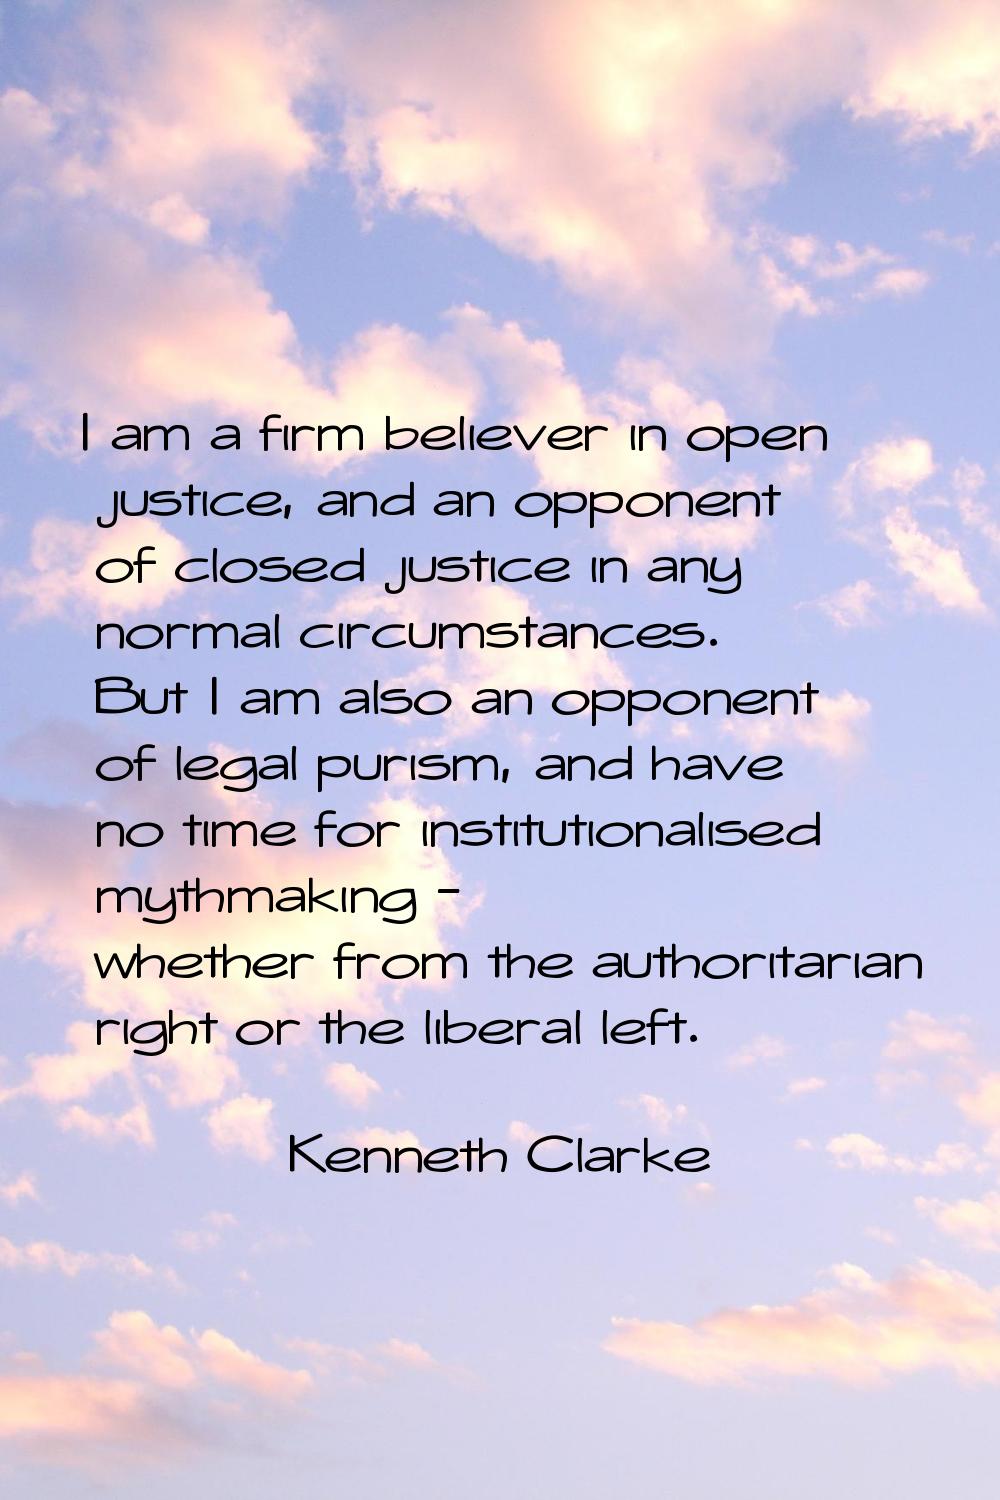 I am a firm believer in open justice, and an opponent of closed justice in any normal circumstances